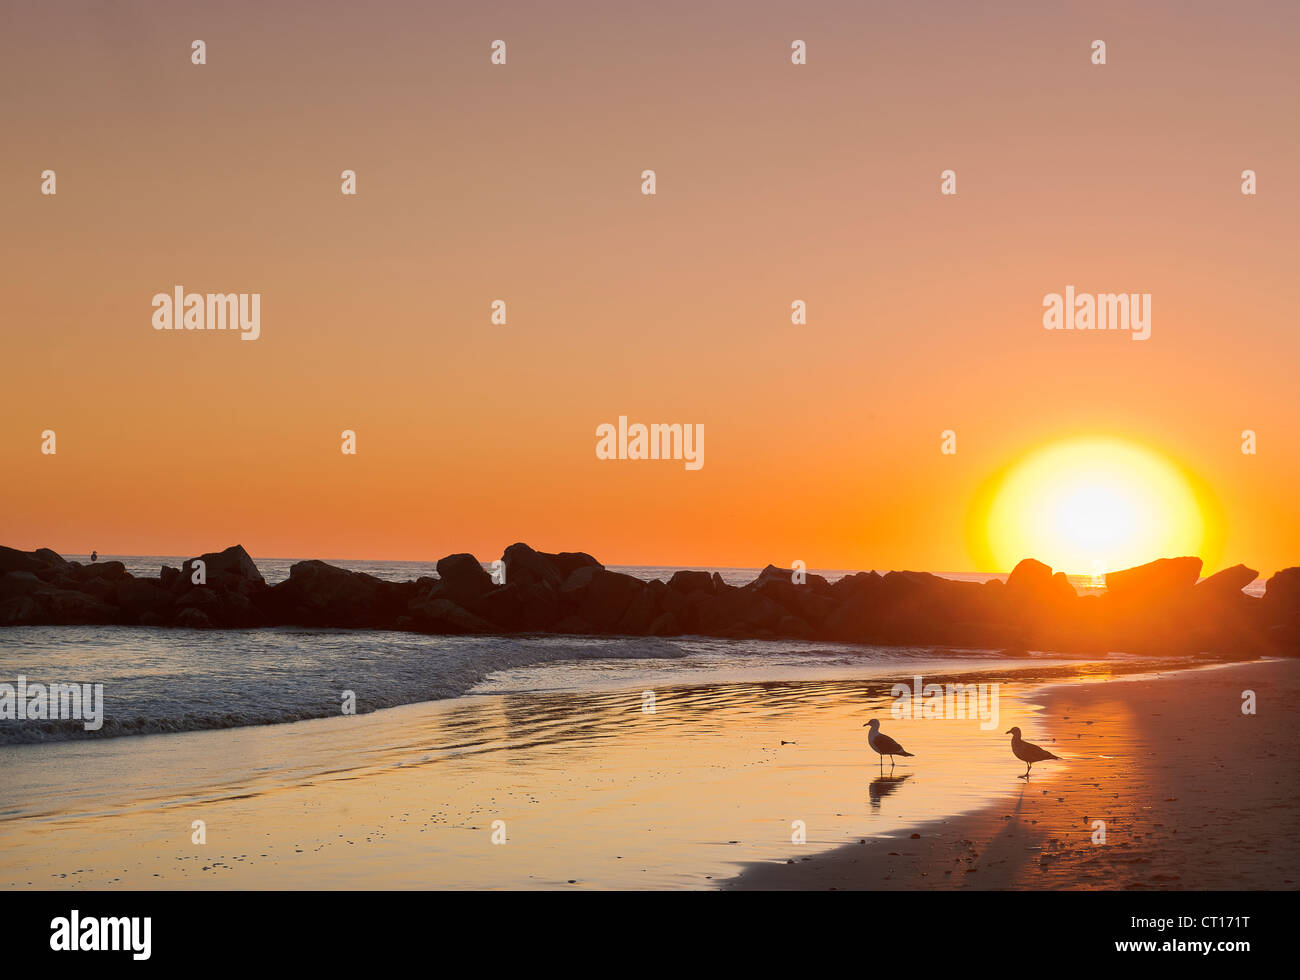 Silhouette of rocks on beach at sunset Stock Photo